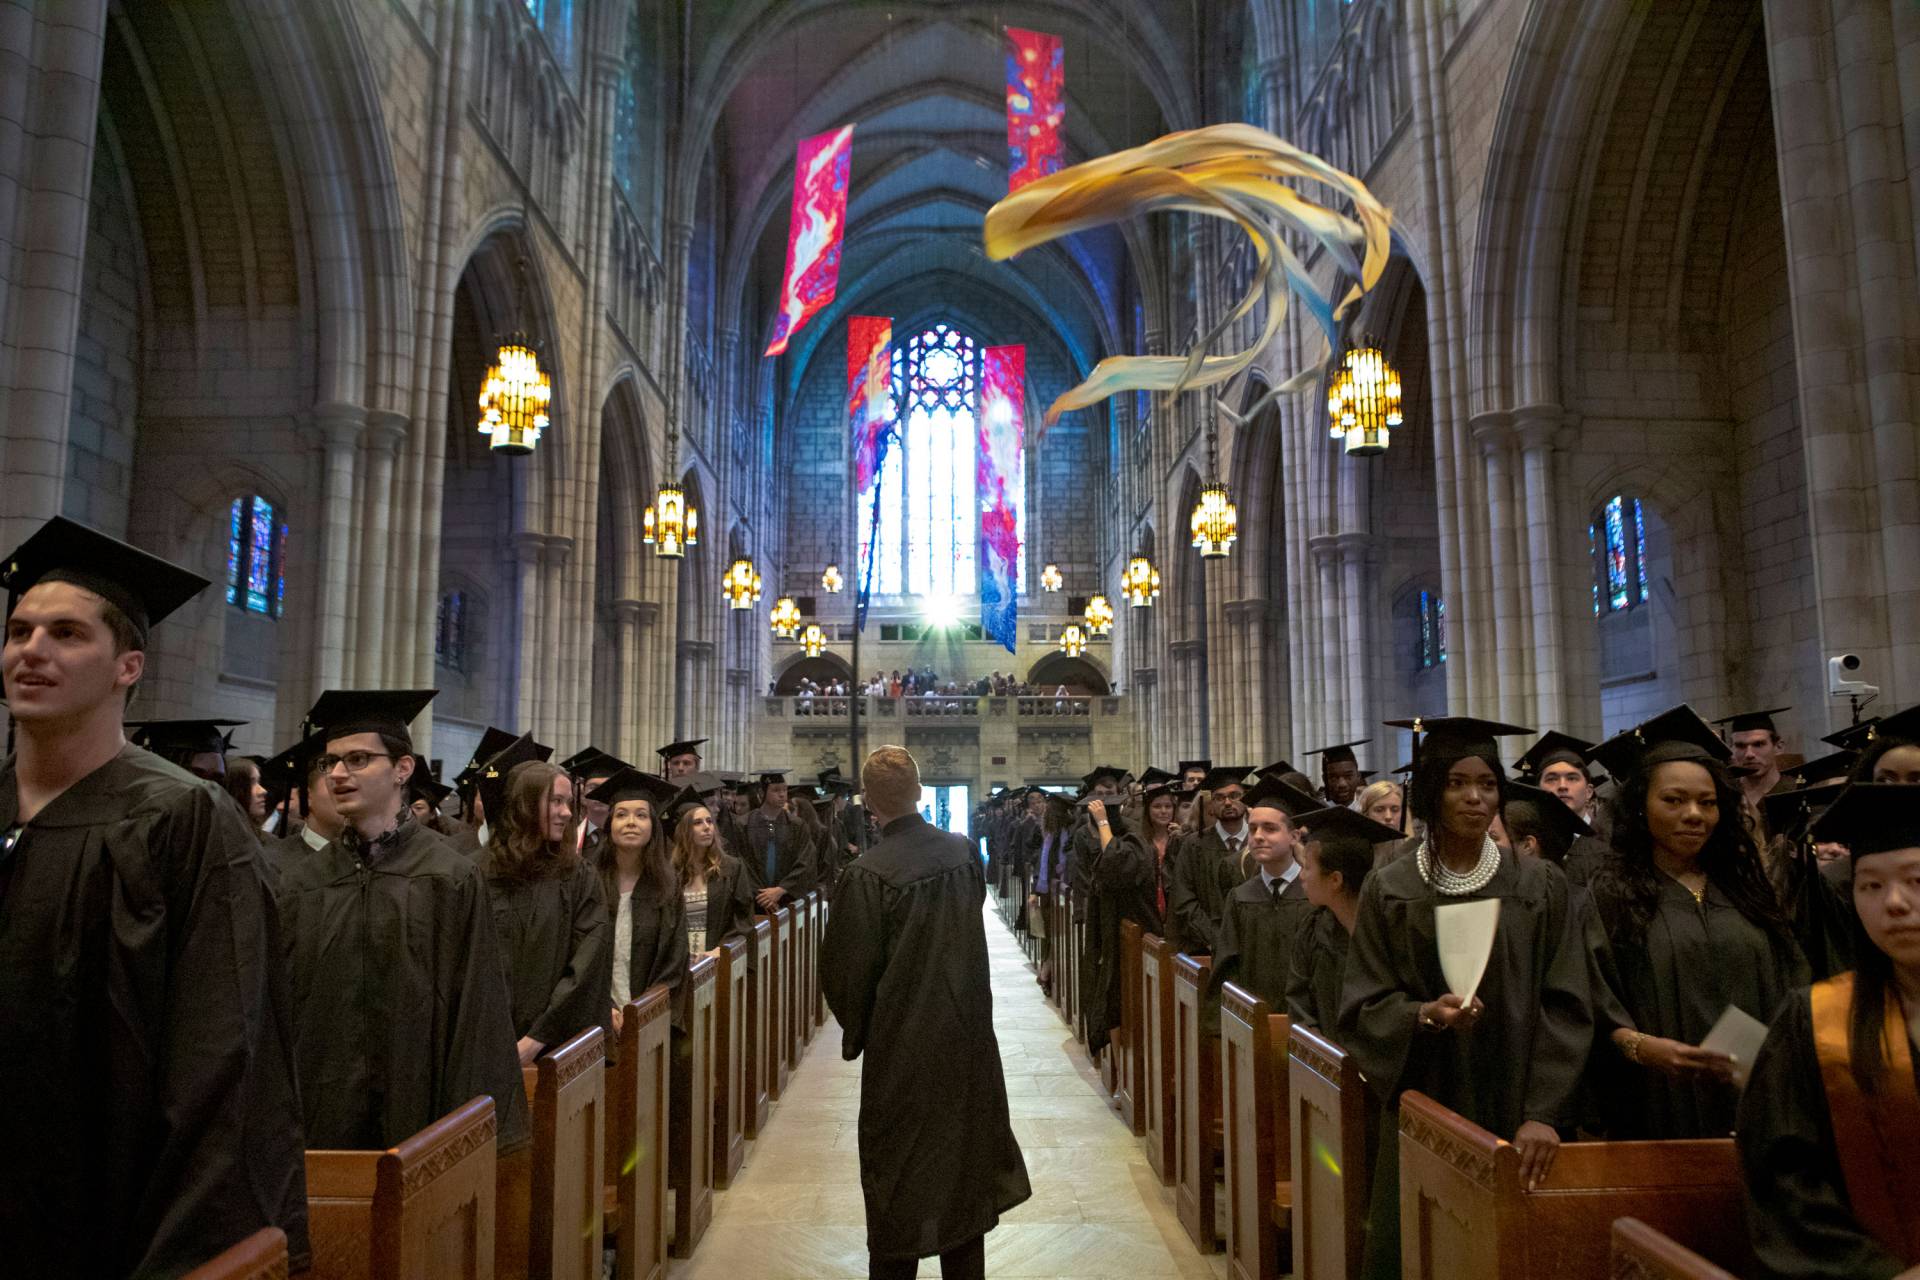 Students wave kites during procession into the chapel